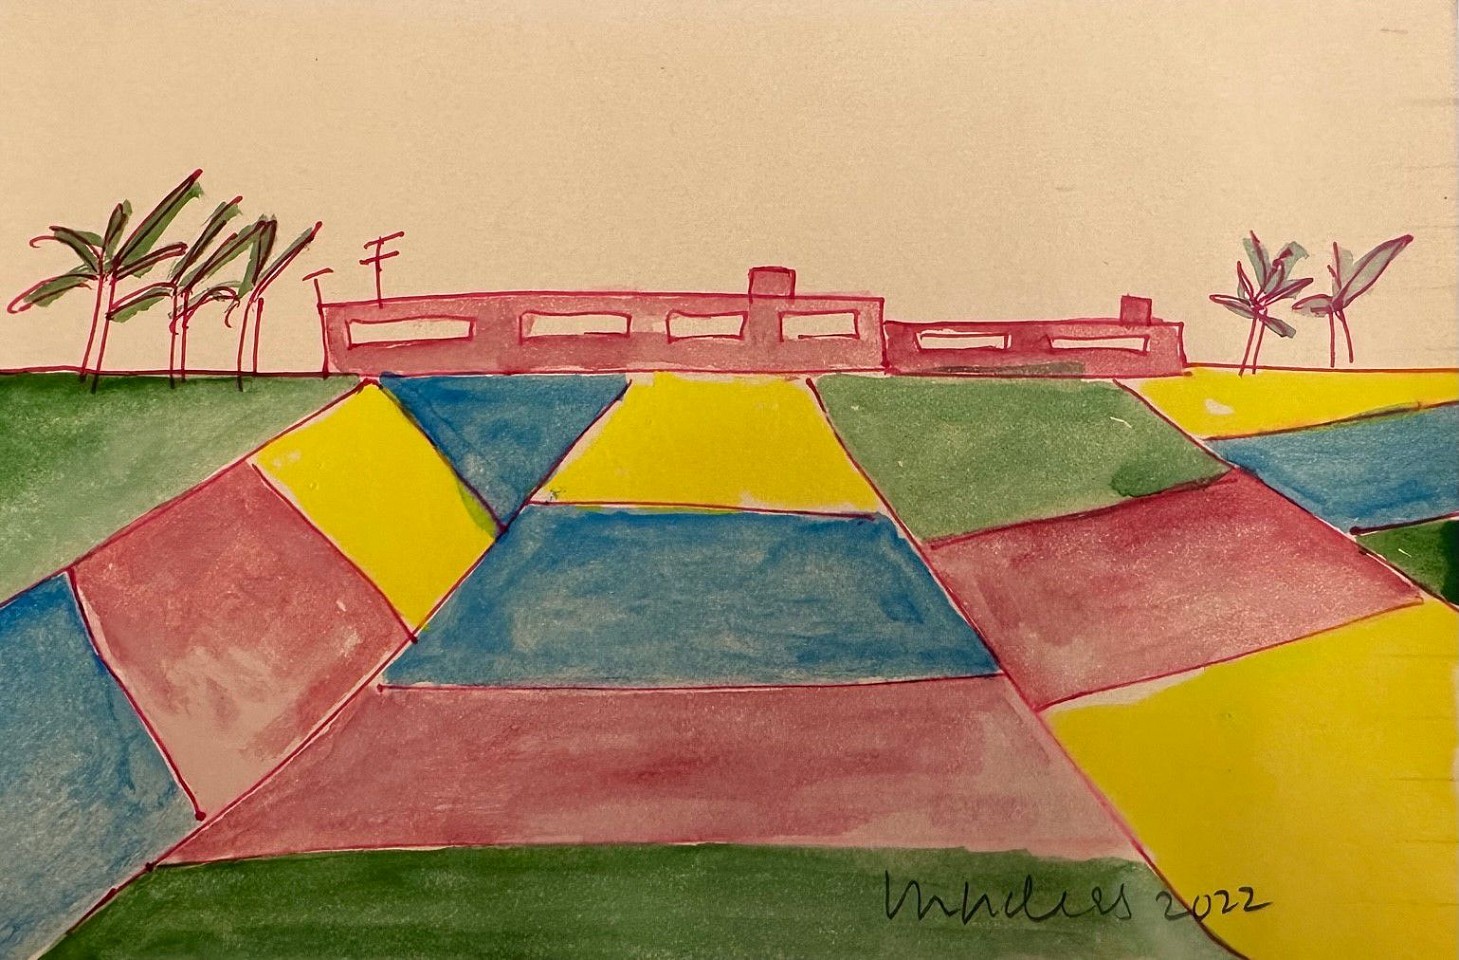 Elizabeth Enders, Factory with Checkered Landscape, 2022
watercolor, pen and ink on paper, 4"" x 6""
EE 1123.03
$750